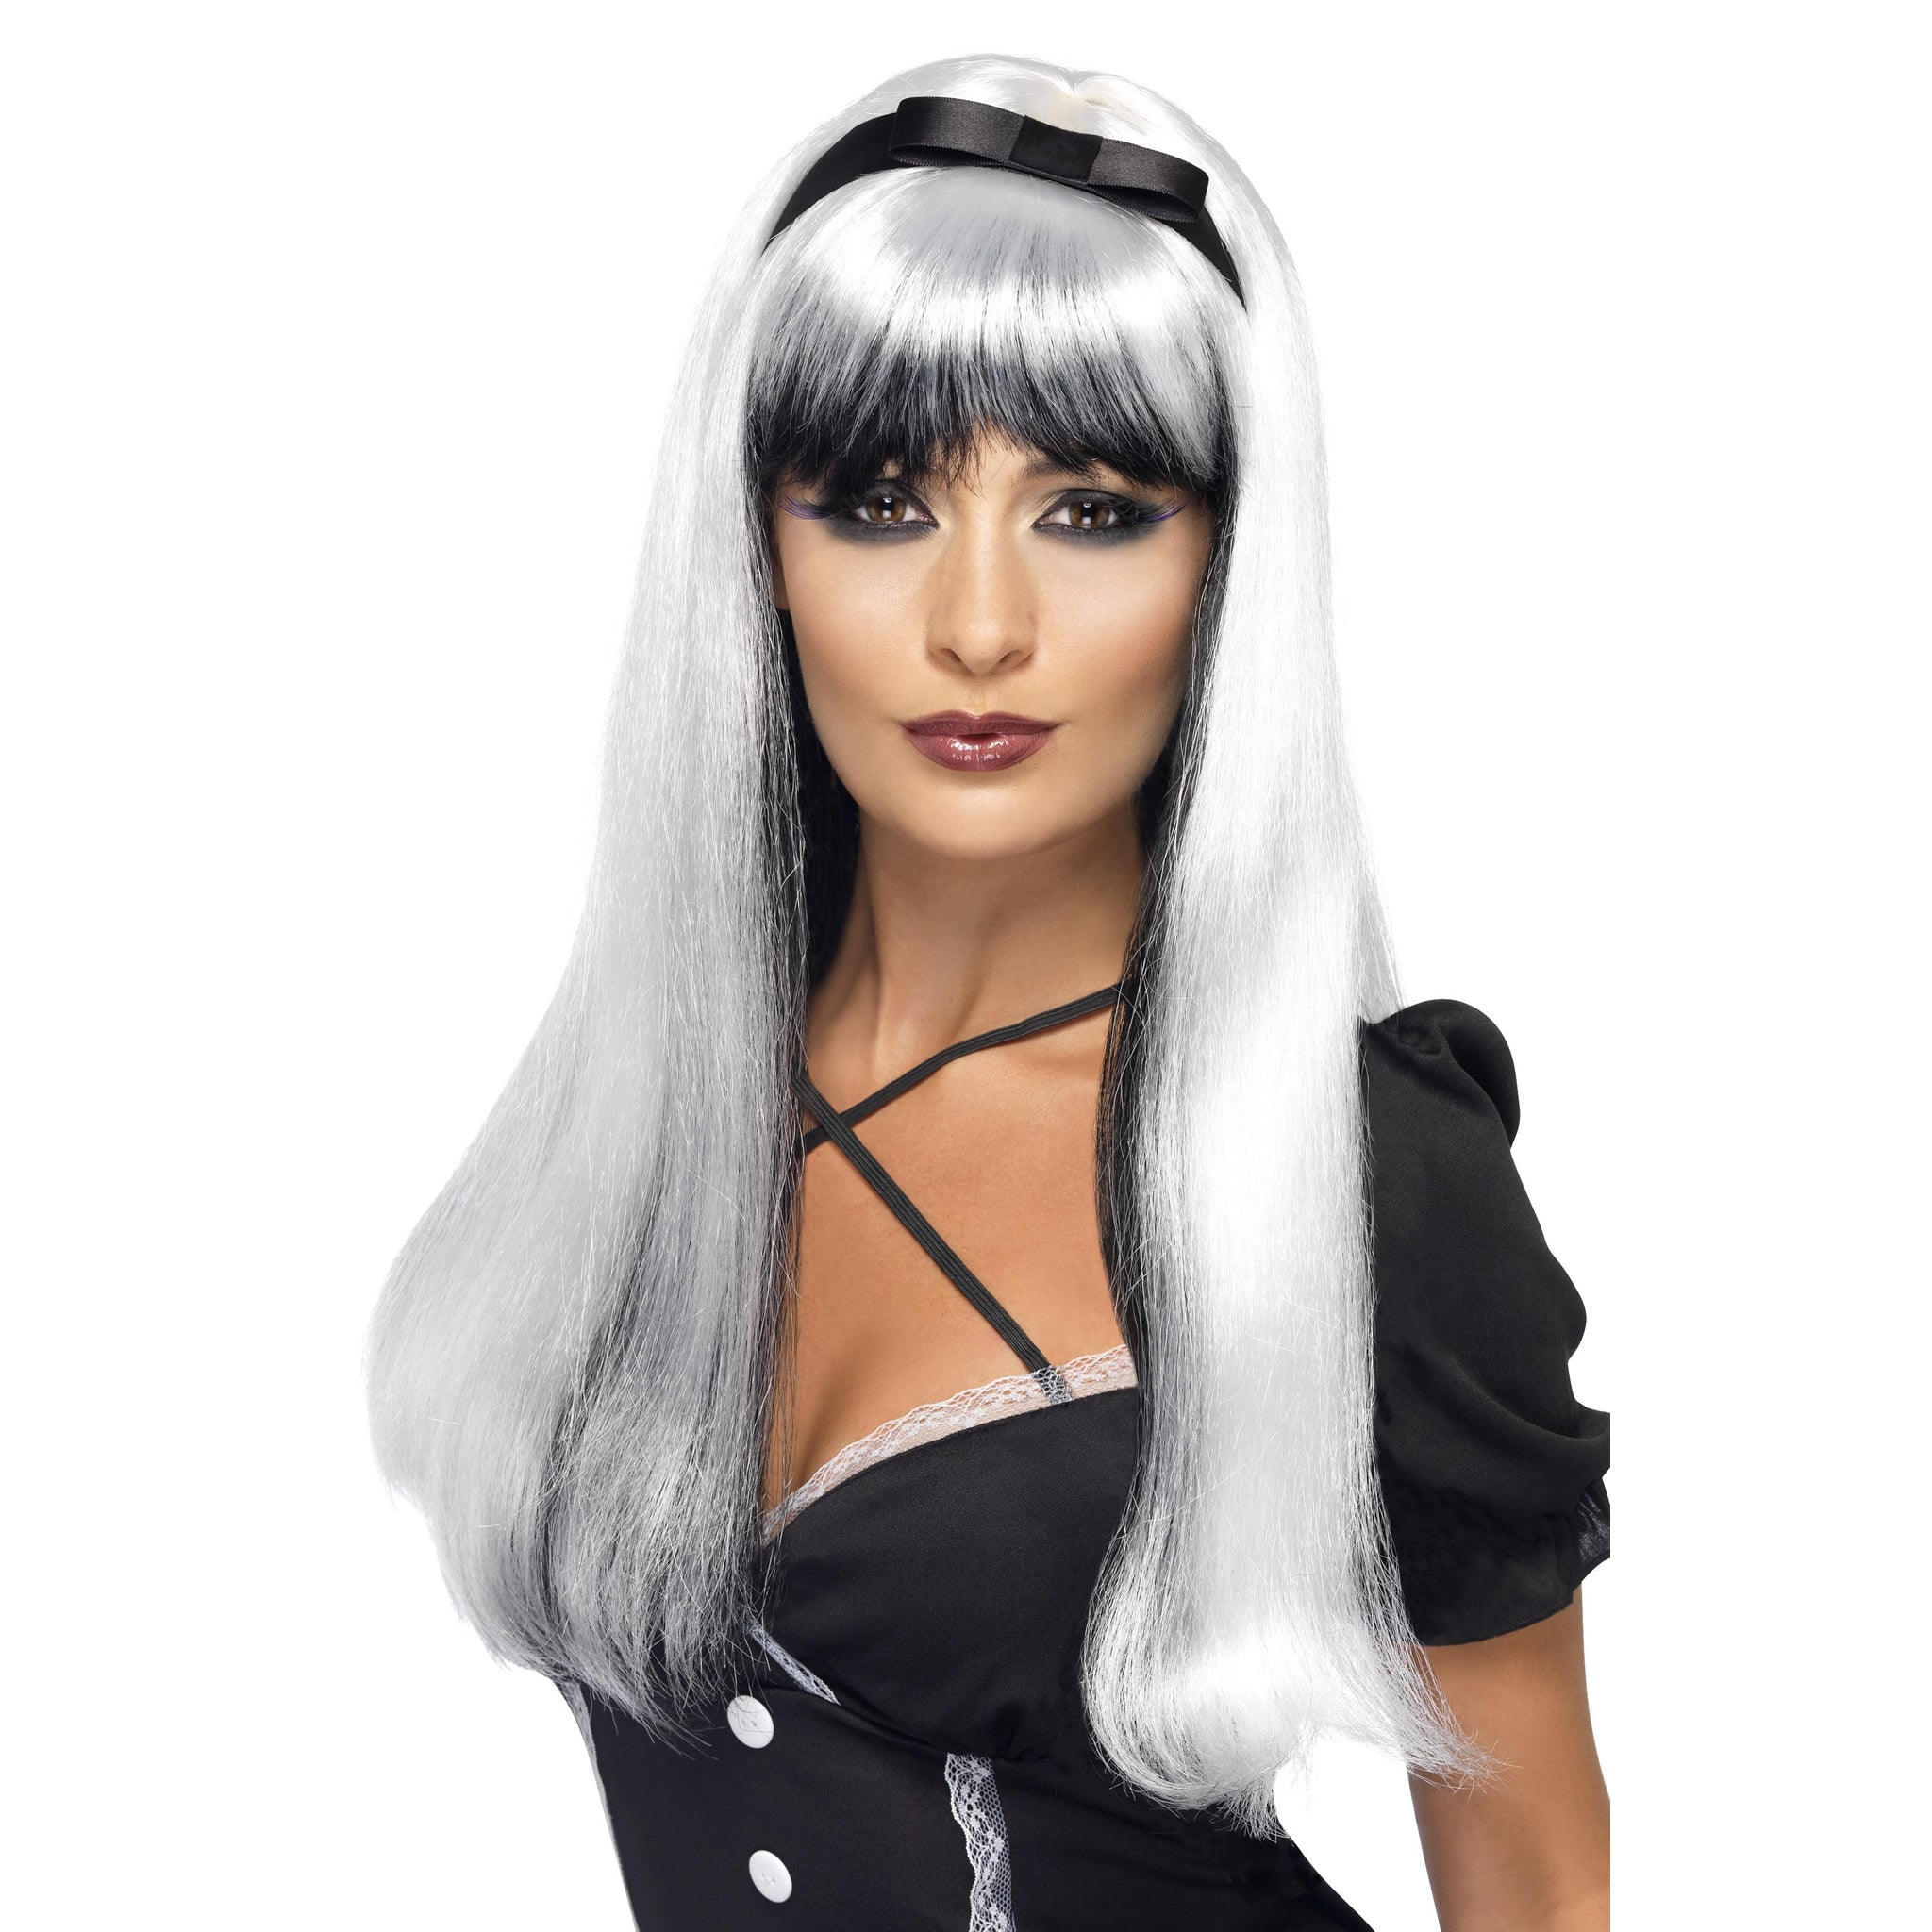 Long white over black ladies wig with ribbon